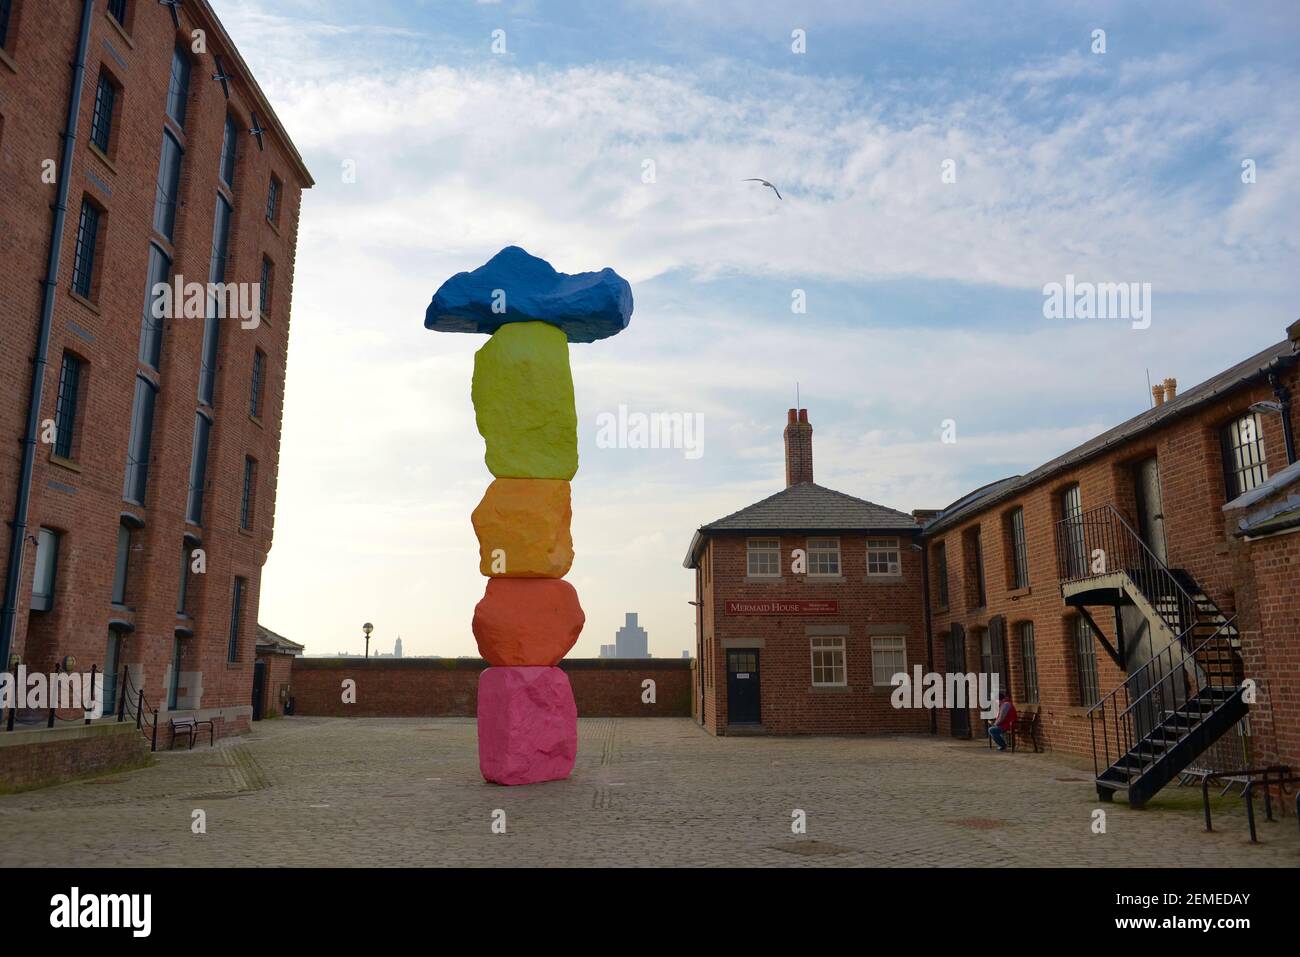 Liverpool, United Kingdom, 2nd February, 2020: Natural perspective of the colorful Liverpool mountain sculpture outside the Tate gallery in Liverpool Stock Photo